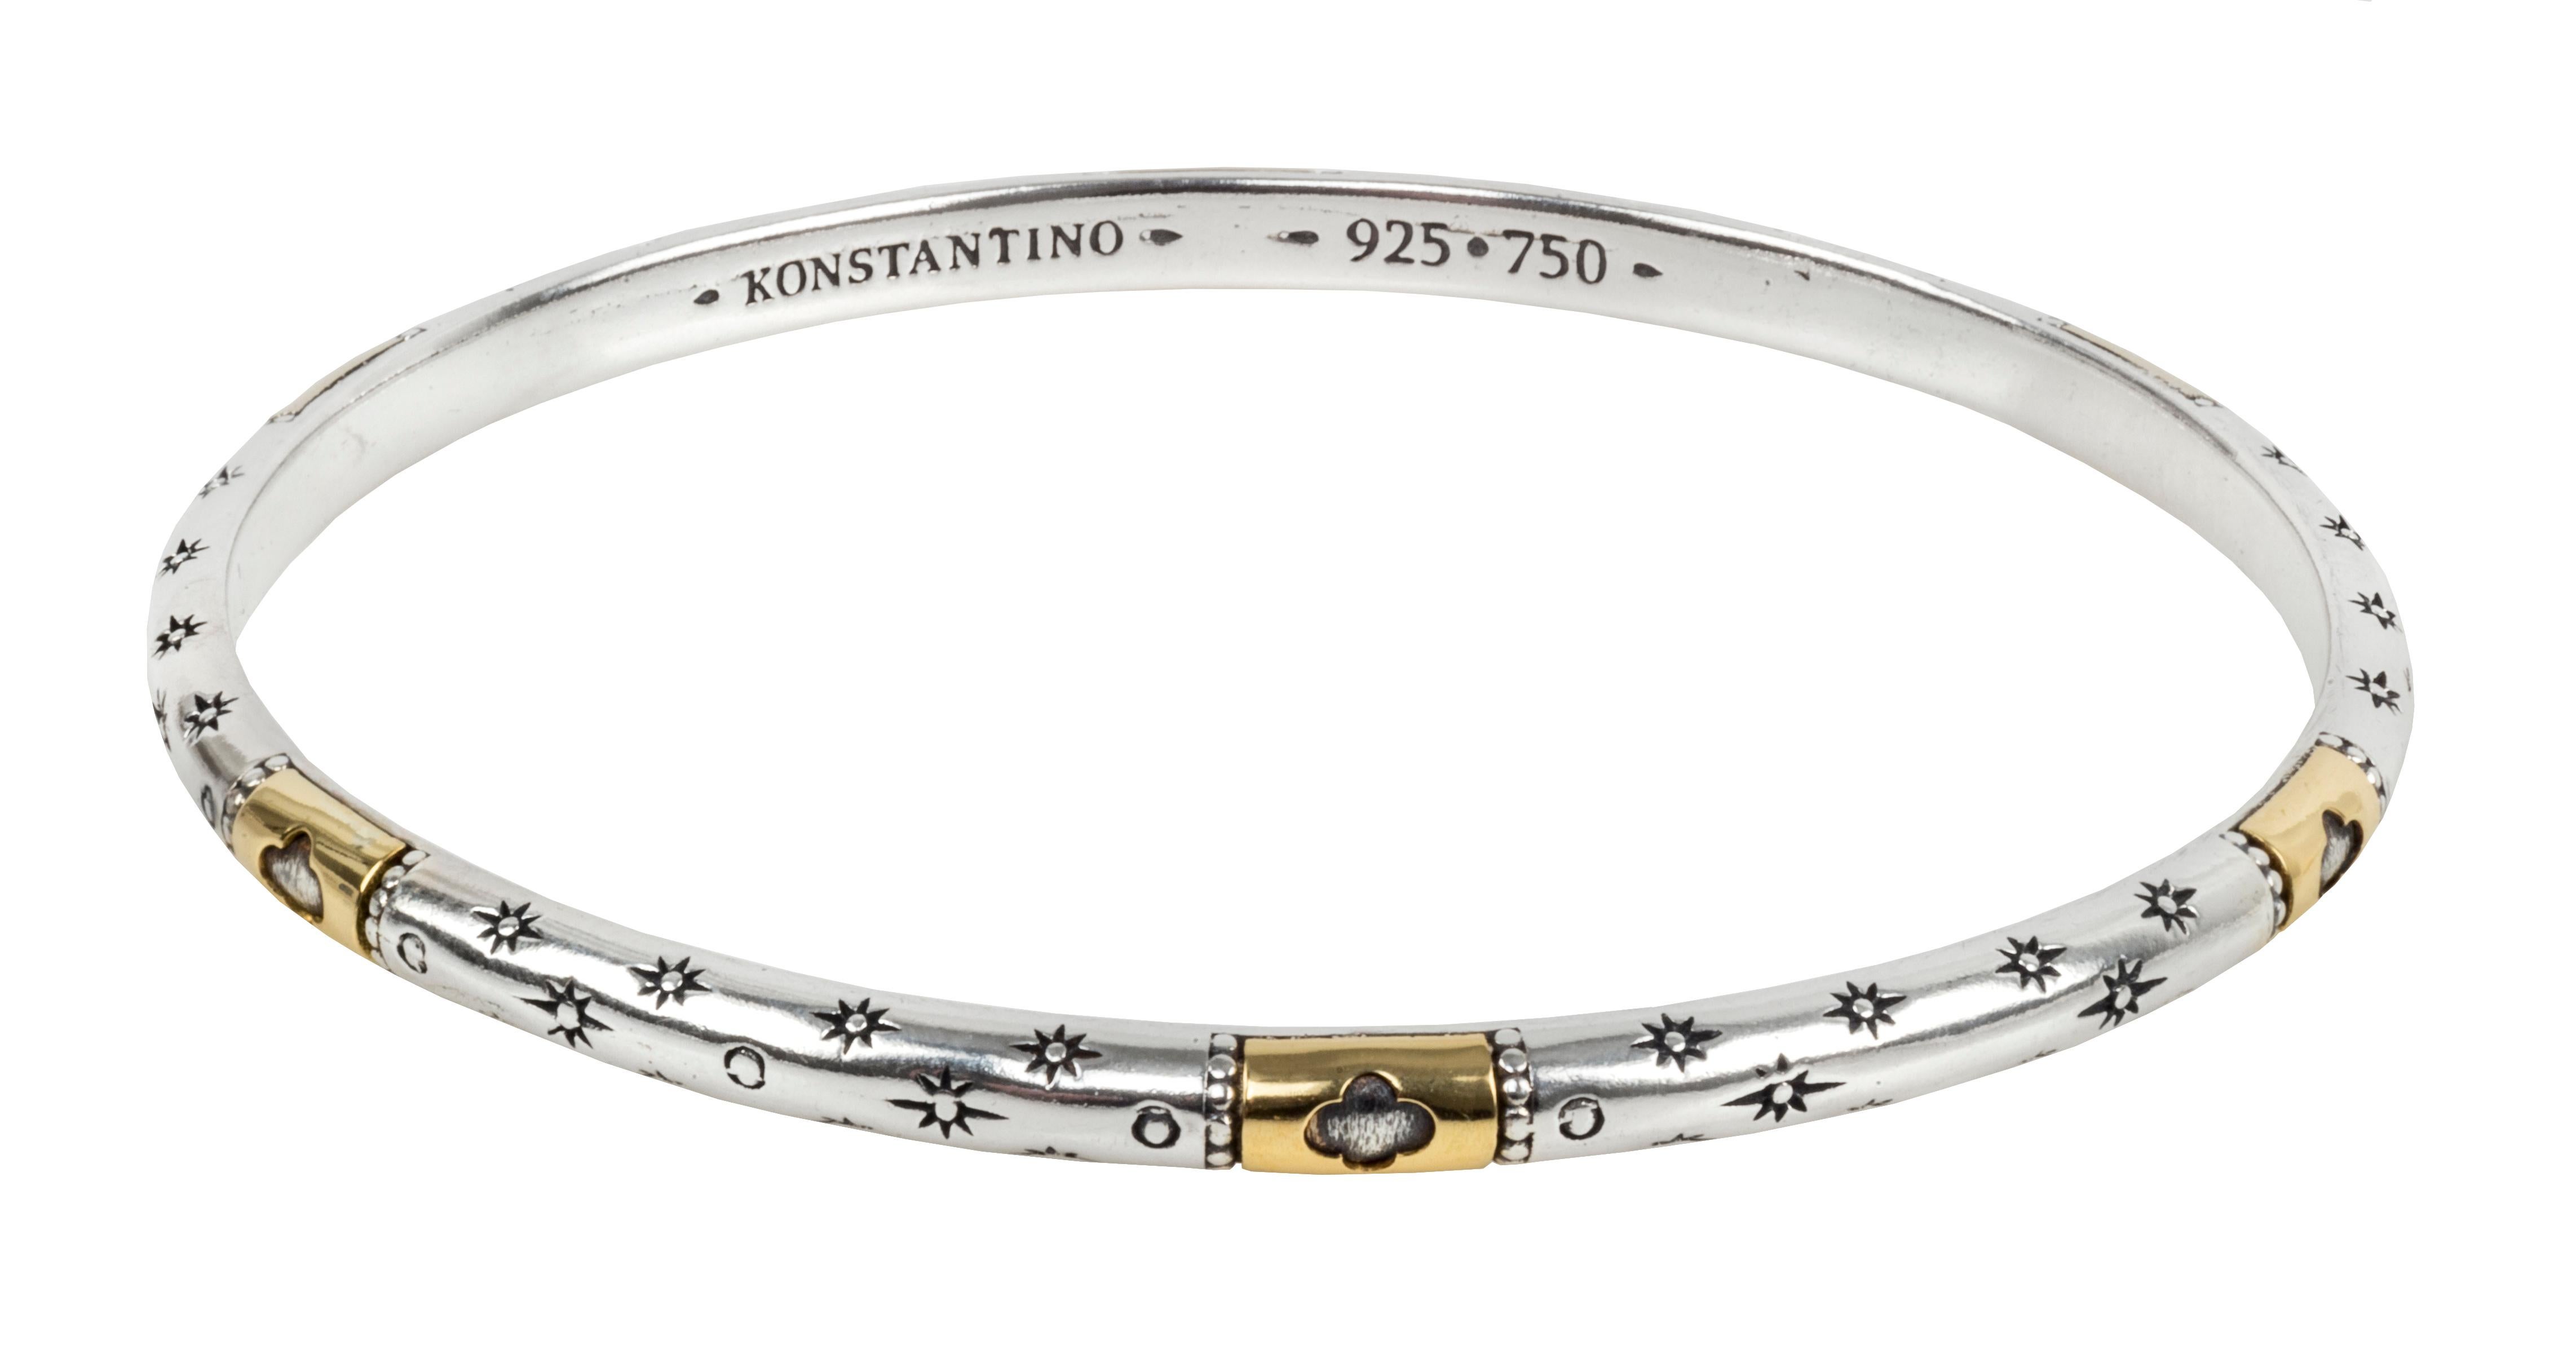 Konstantino Sterling Silver and Yellow Gold Astria Bangle Bracelet.  Stamped Konstantino, 925 and 750.  